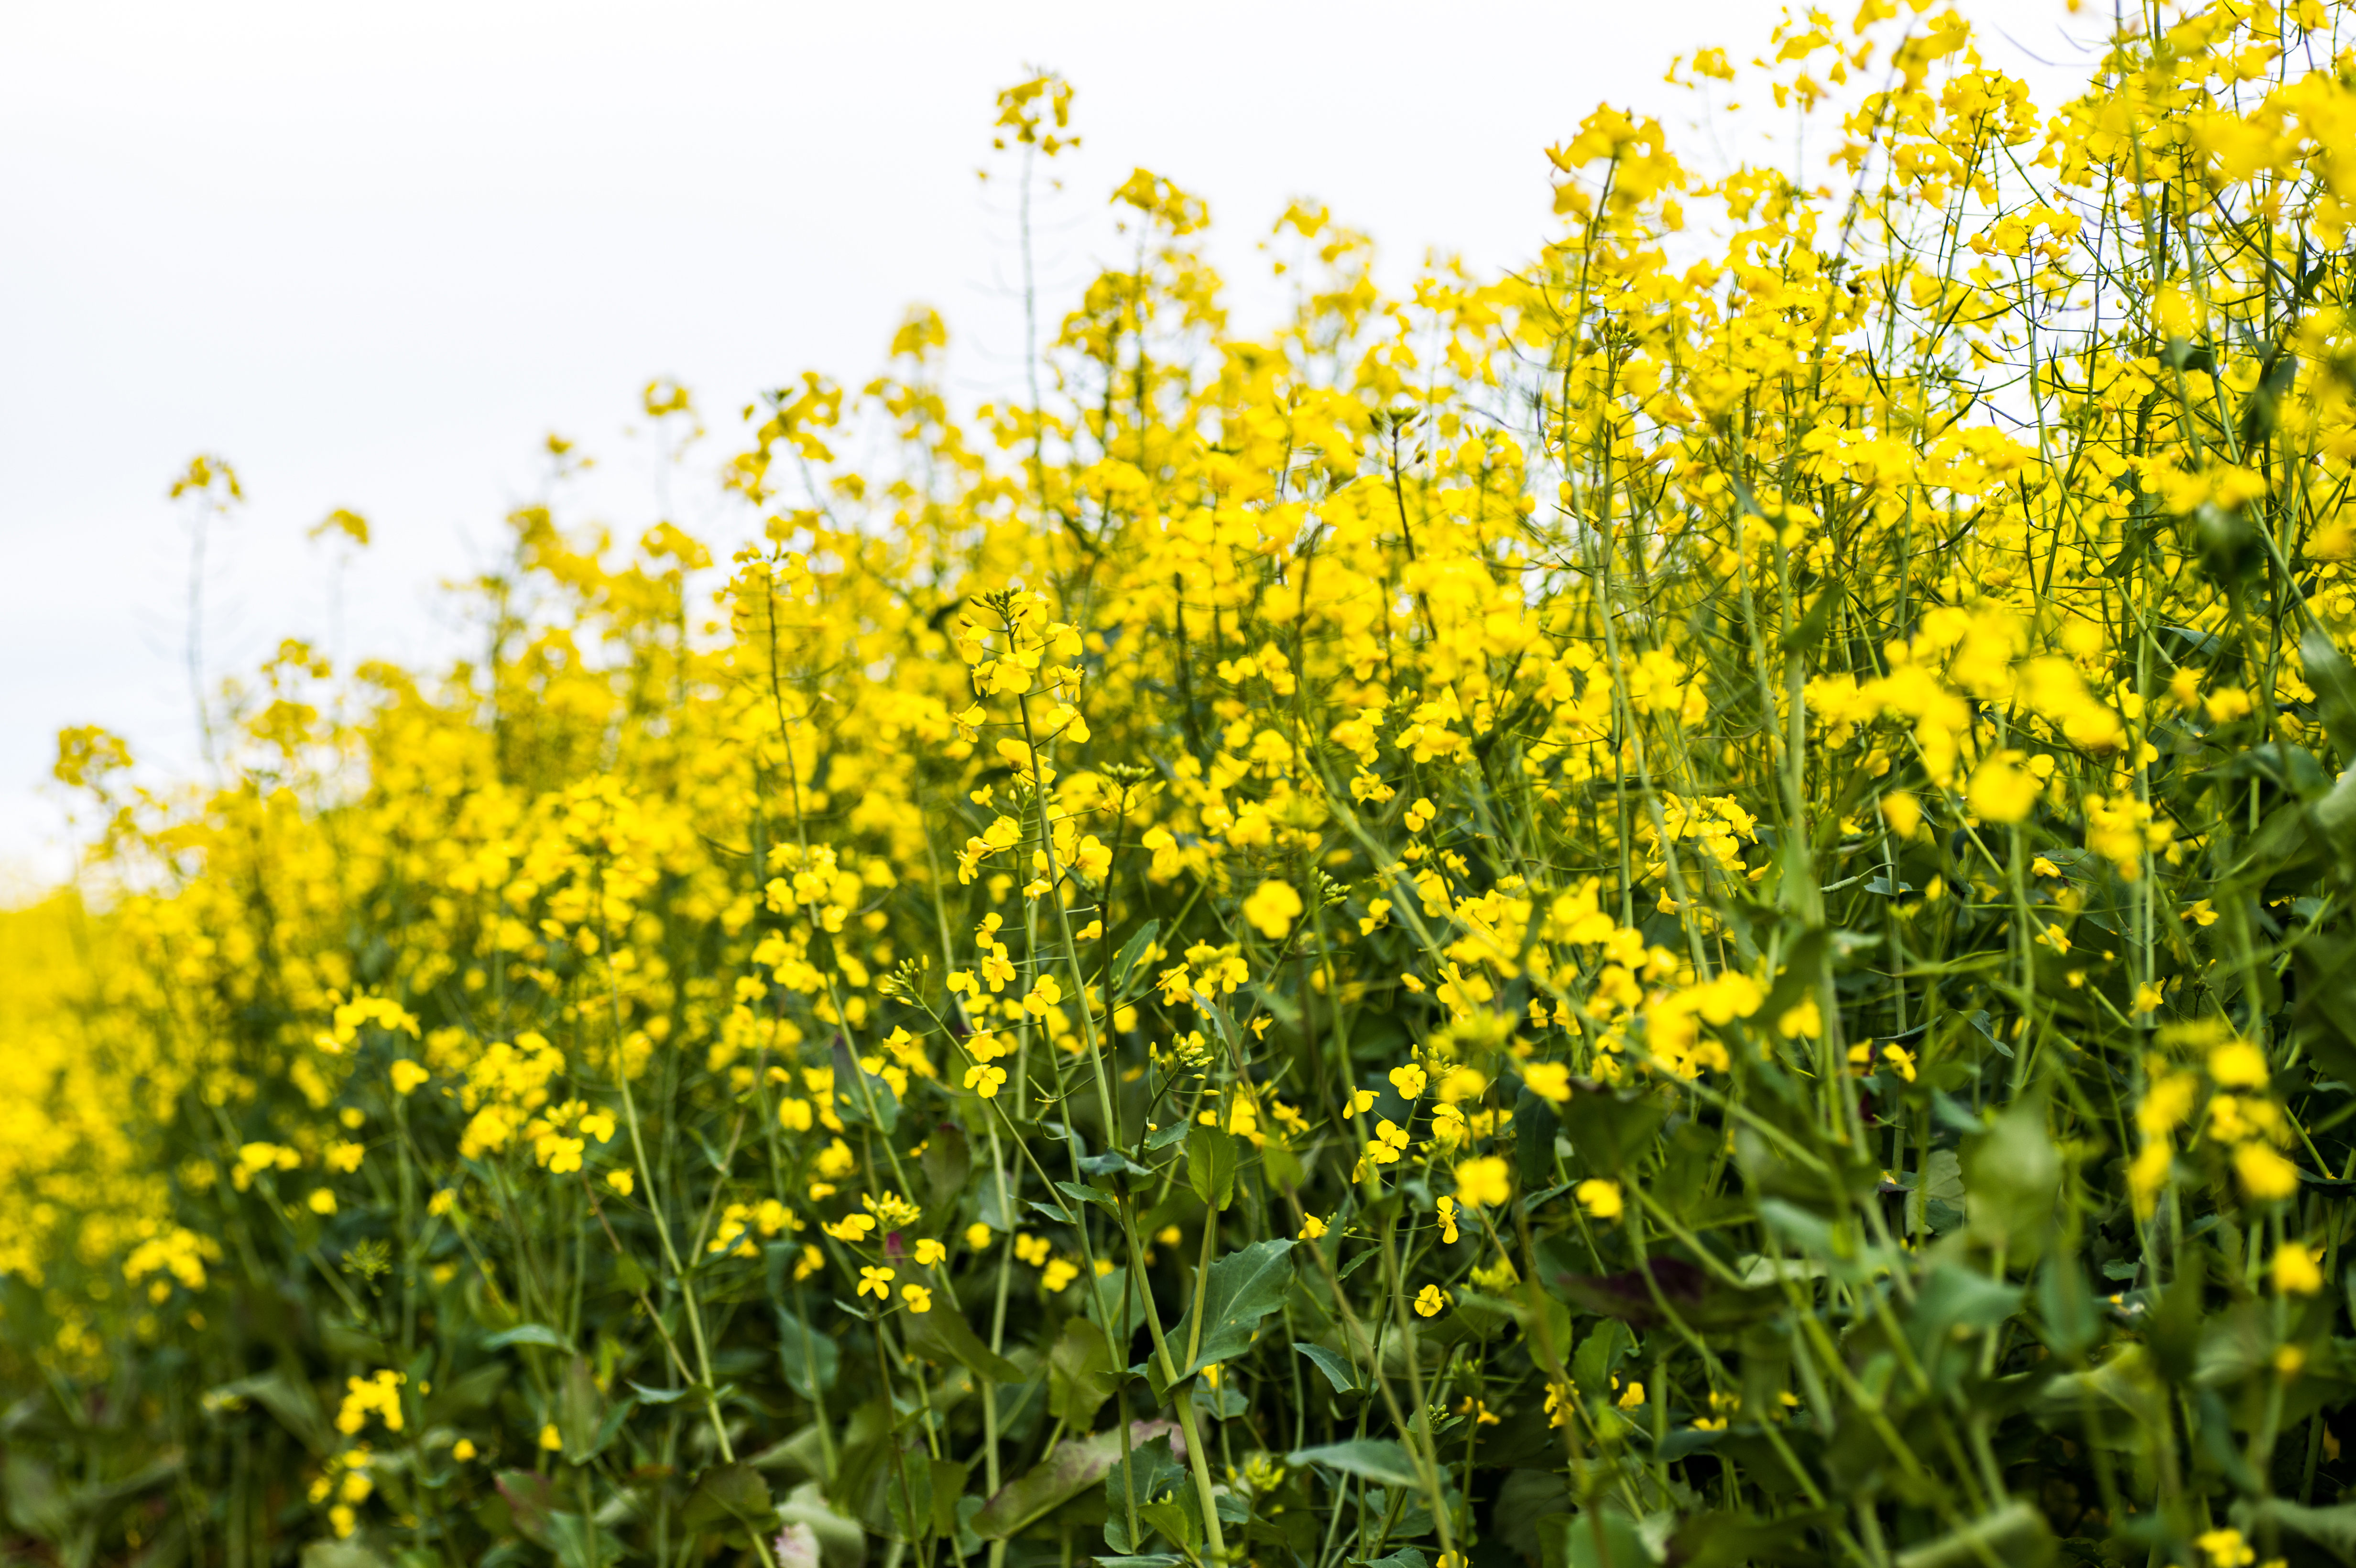 Timing the flowering of a canola crop by a number of factors including location can ensure quality and yield.